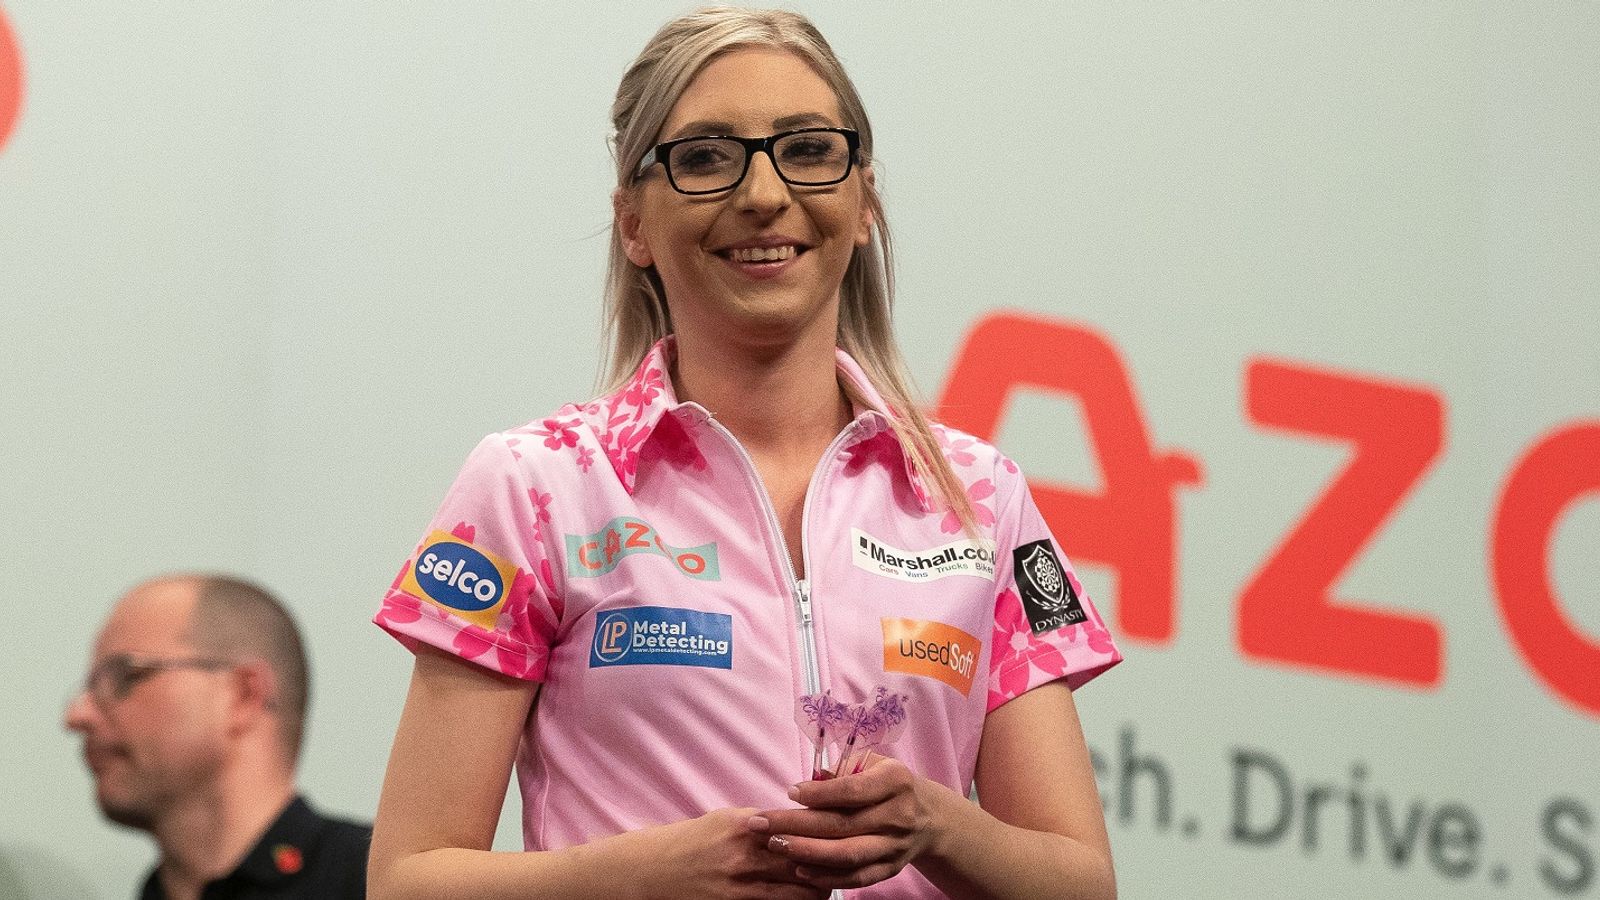 Women’s World Matchplay: Fallon Sherrock on target to defend her title in Blackpool with Beau Greaves and Mikuru Suzuki confirmed | Darts News